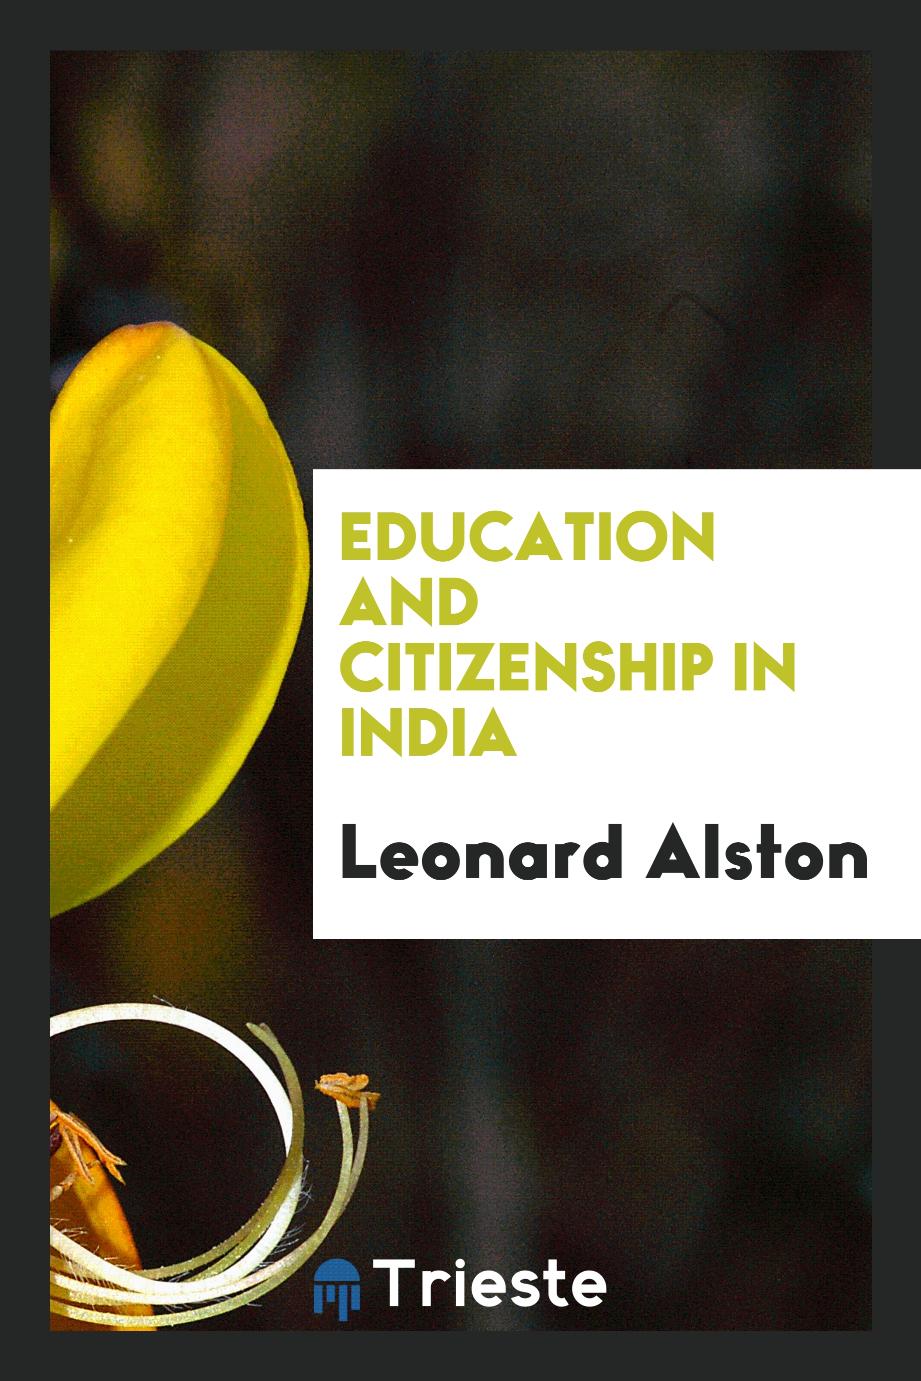 Education and citizenship in India